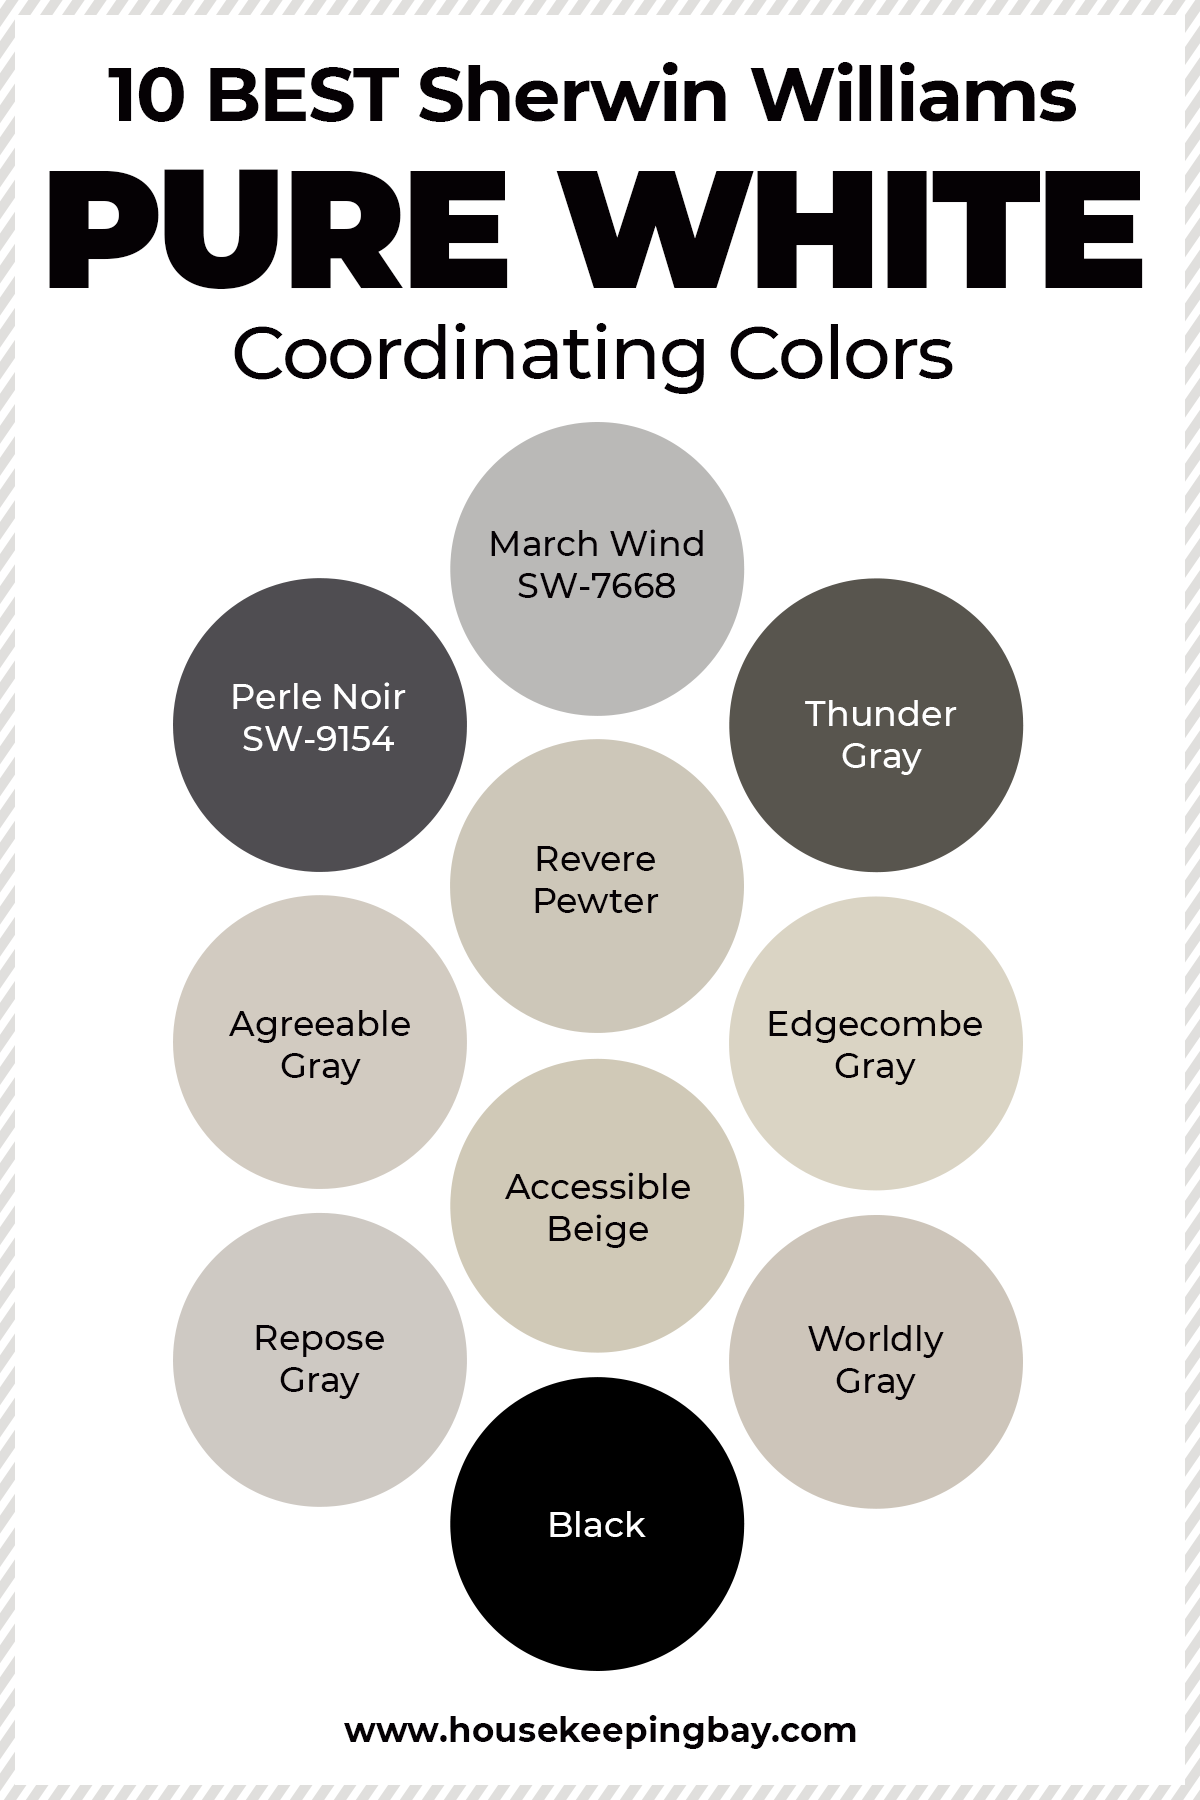 10 BEST Sherwin Williams Pure White Coordinating Colors